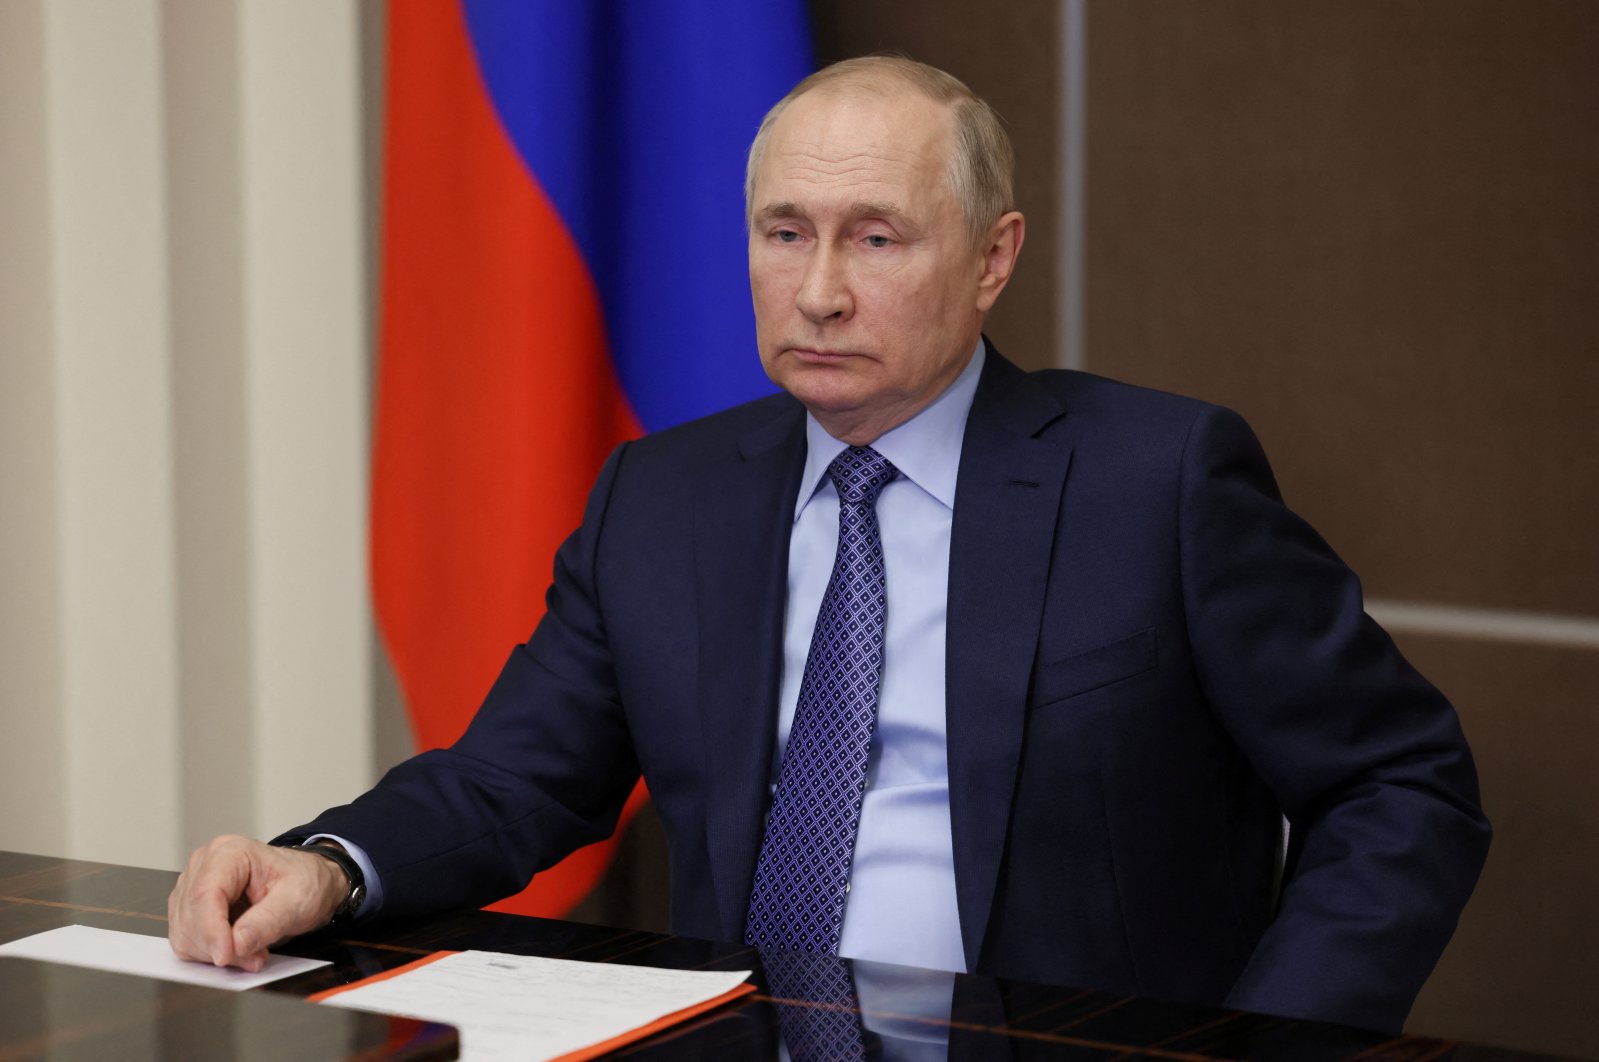 Russian President Vladimir Putin chairs a meeting with members of the Security Council via a video link in Sochi, Russia Nov. 2, 2022. (Sputnik Pool via Reuters)